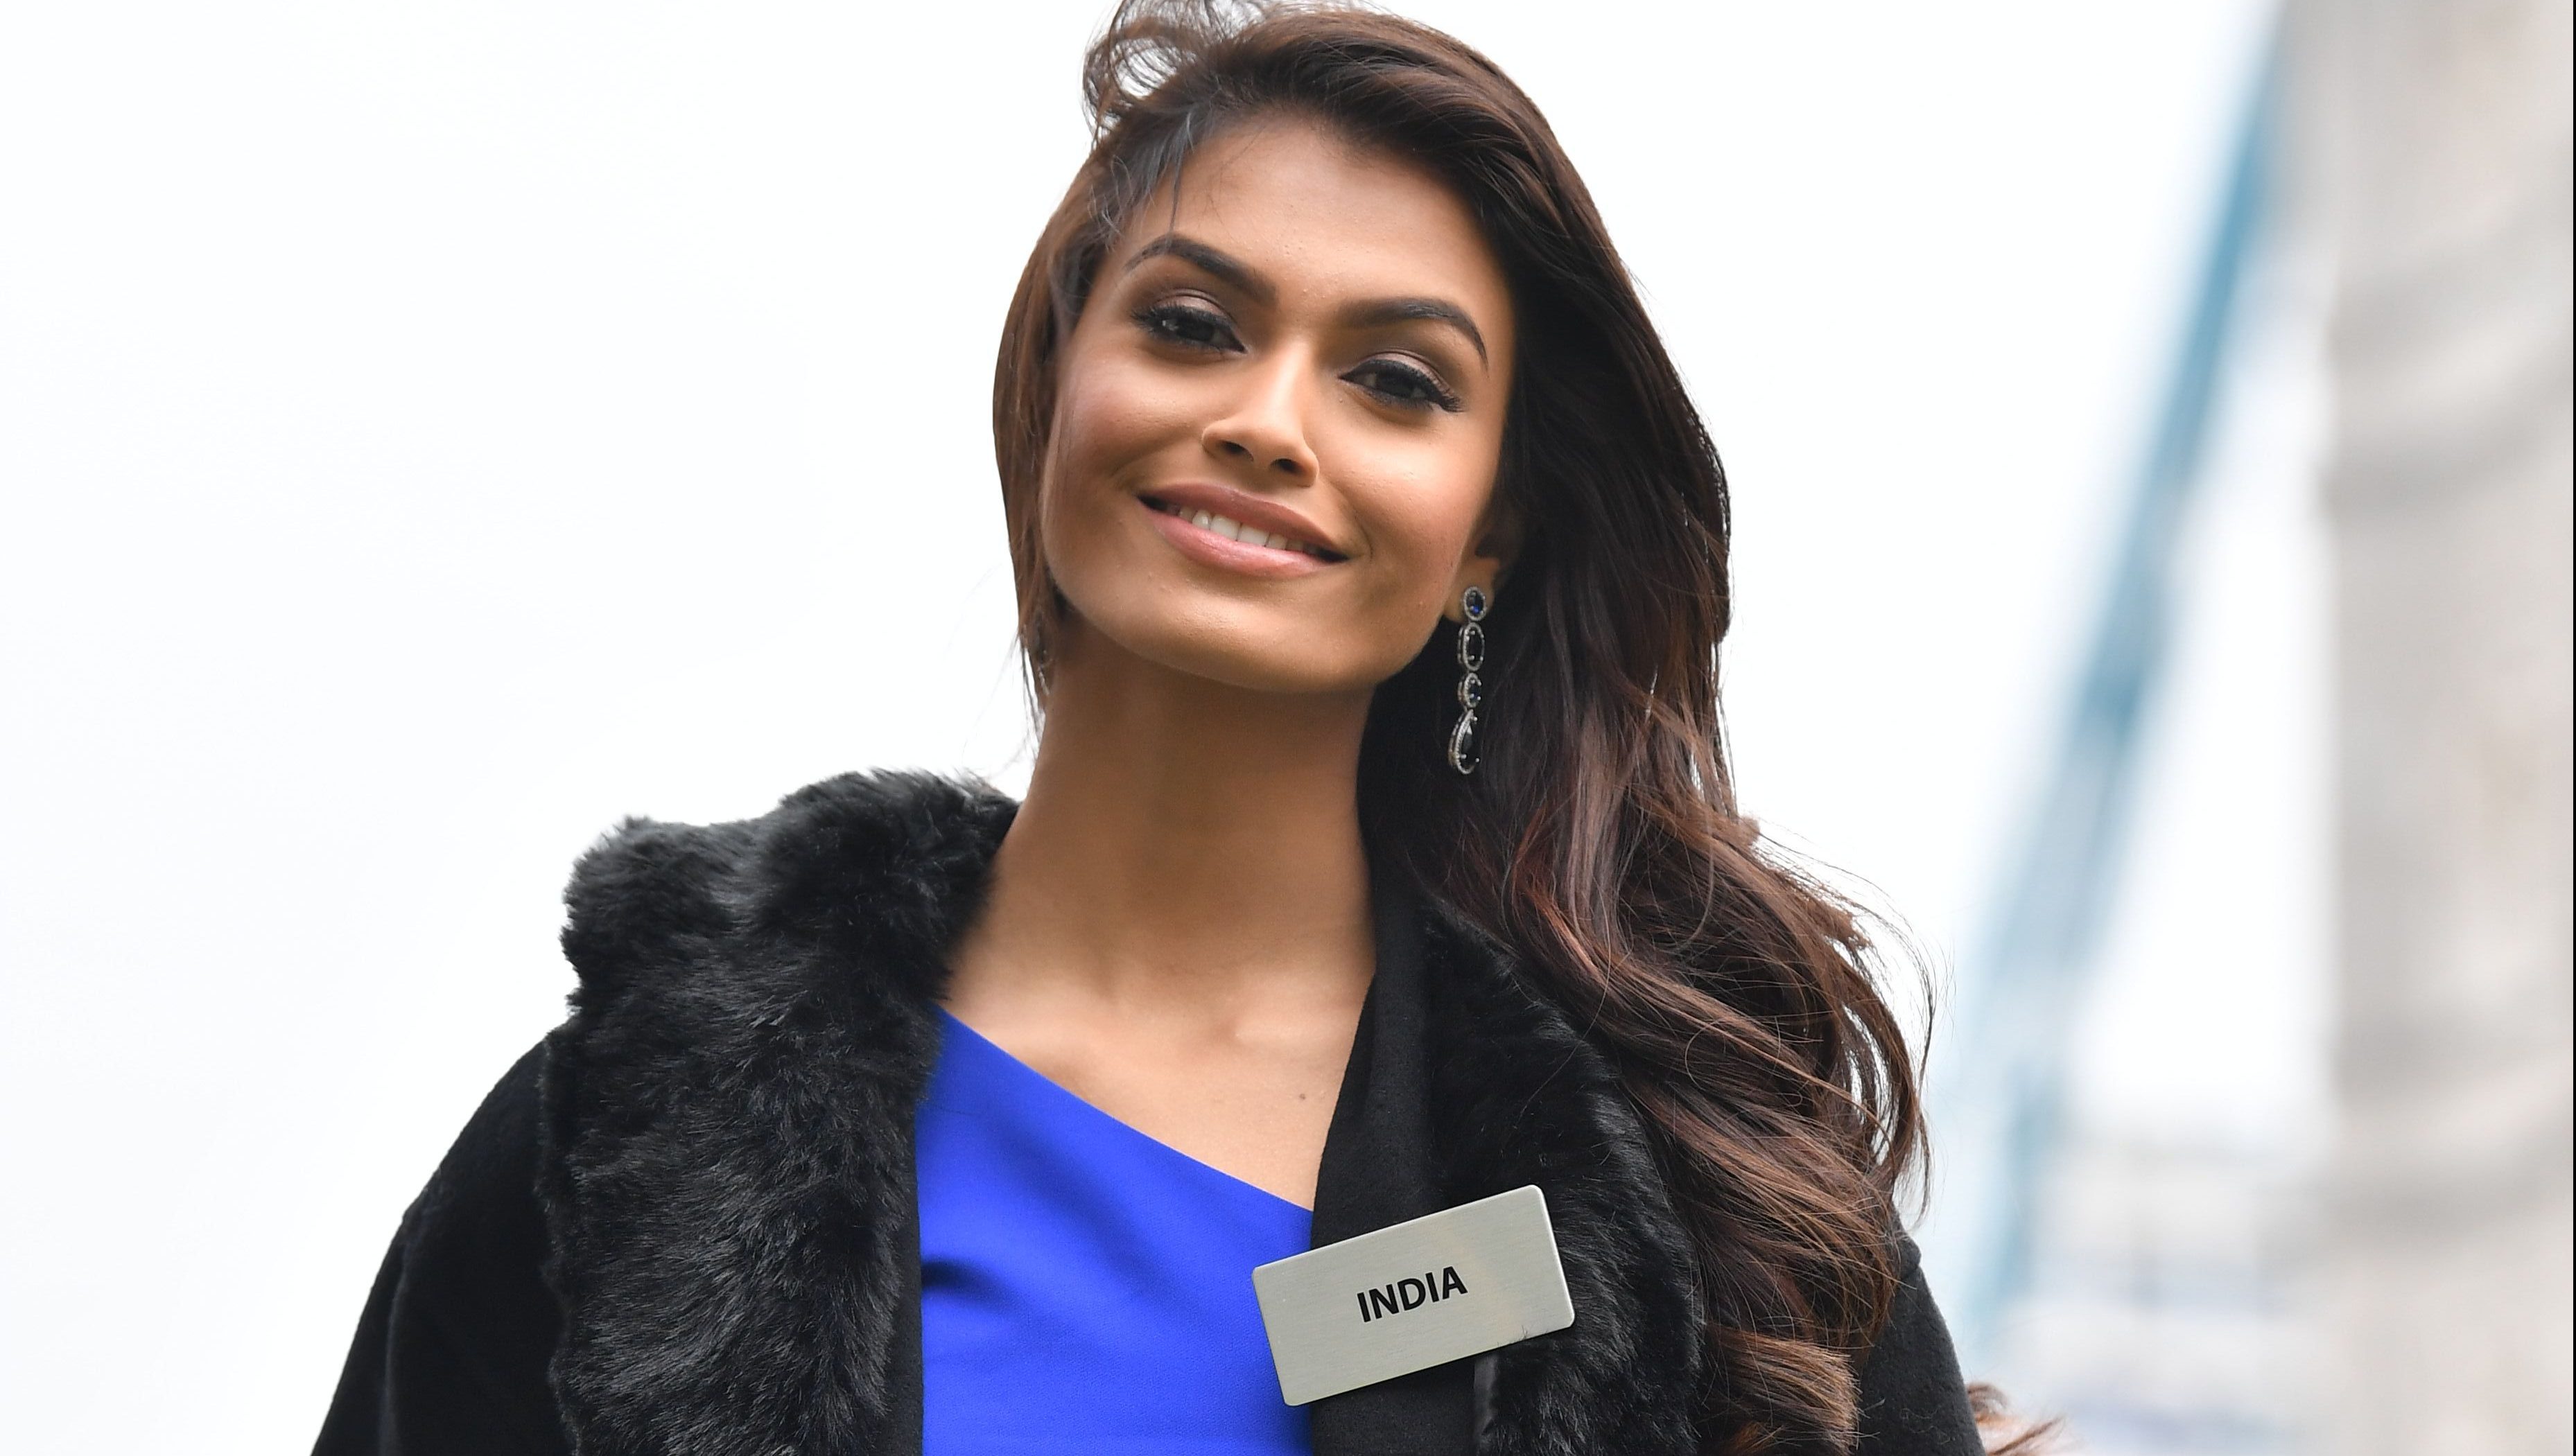 Miss Indian Xnxx - Suman Rao, Miss India World 2019: 5 Fast Facts to Know | Heavy.com